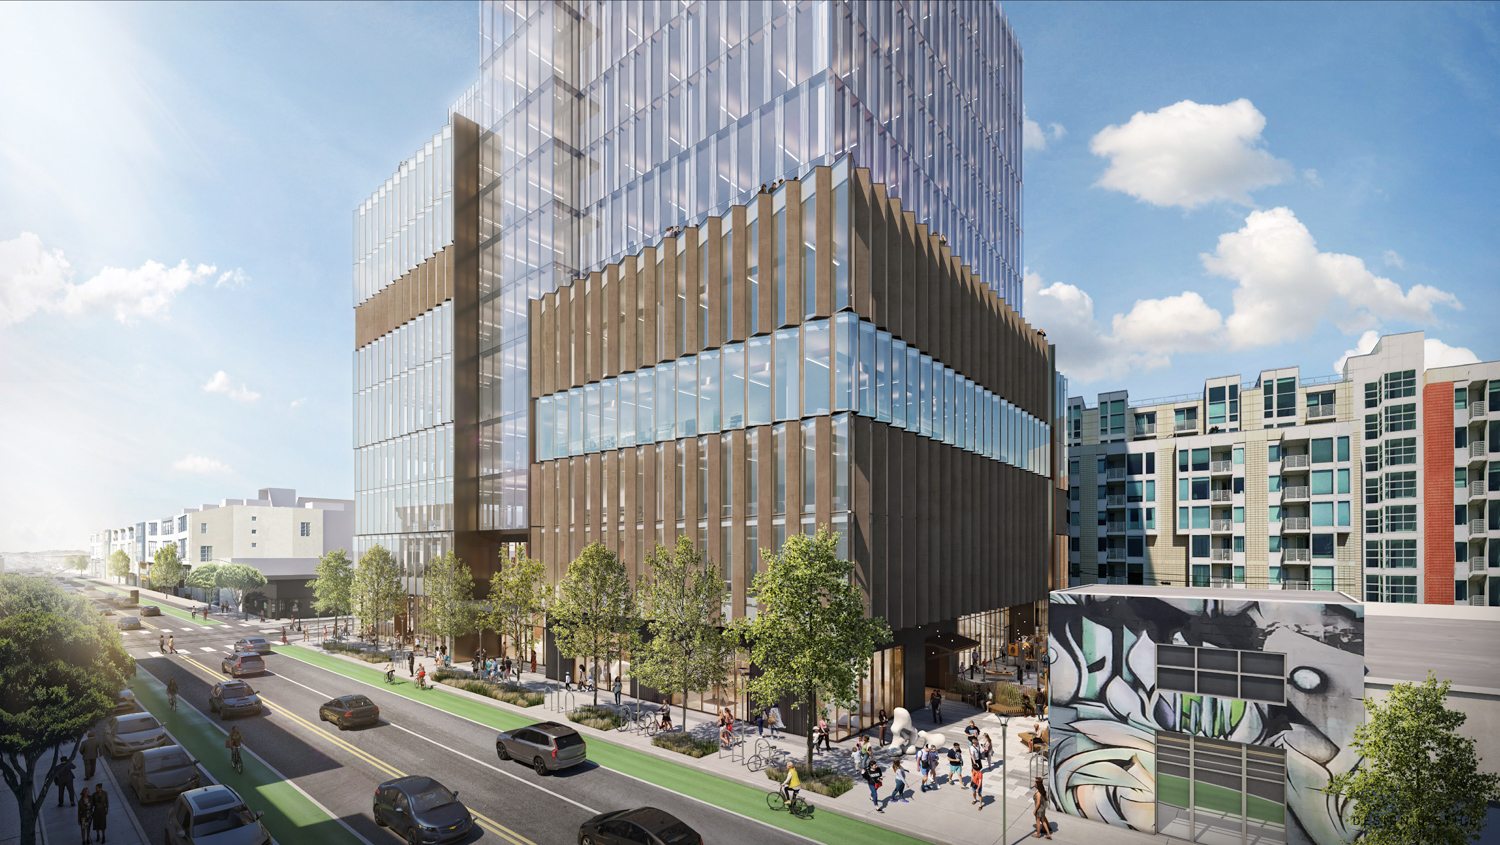 490 Brannan Street seen from across the street with a glimpse at the mid-block alley, rendering by Perkins&Will